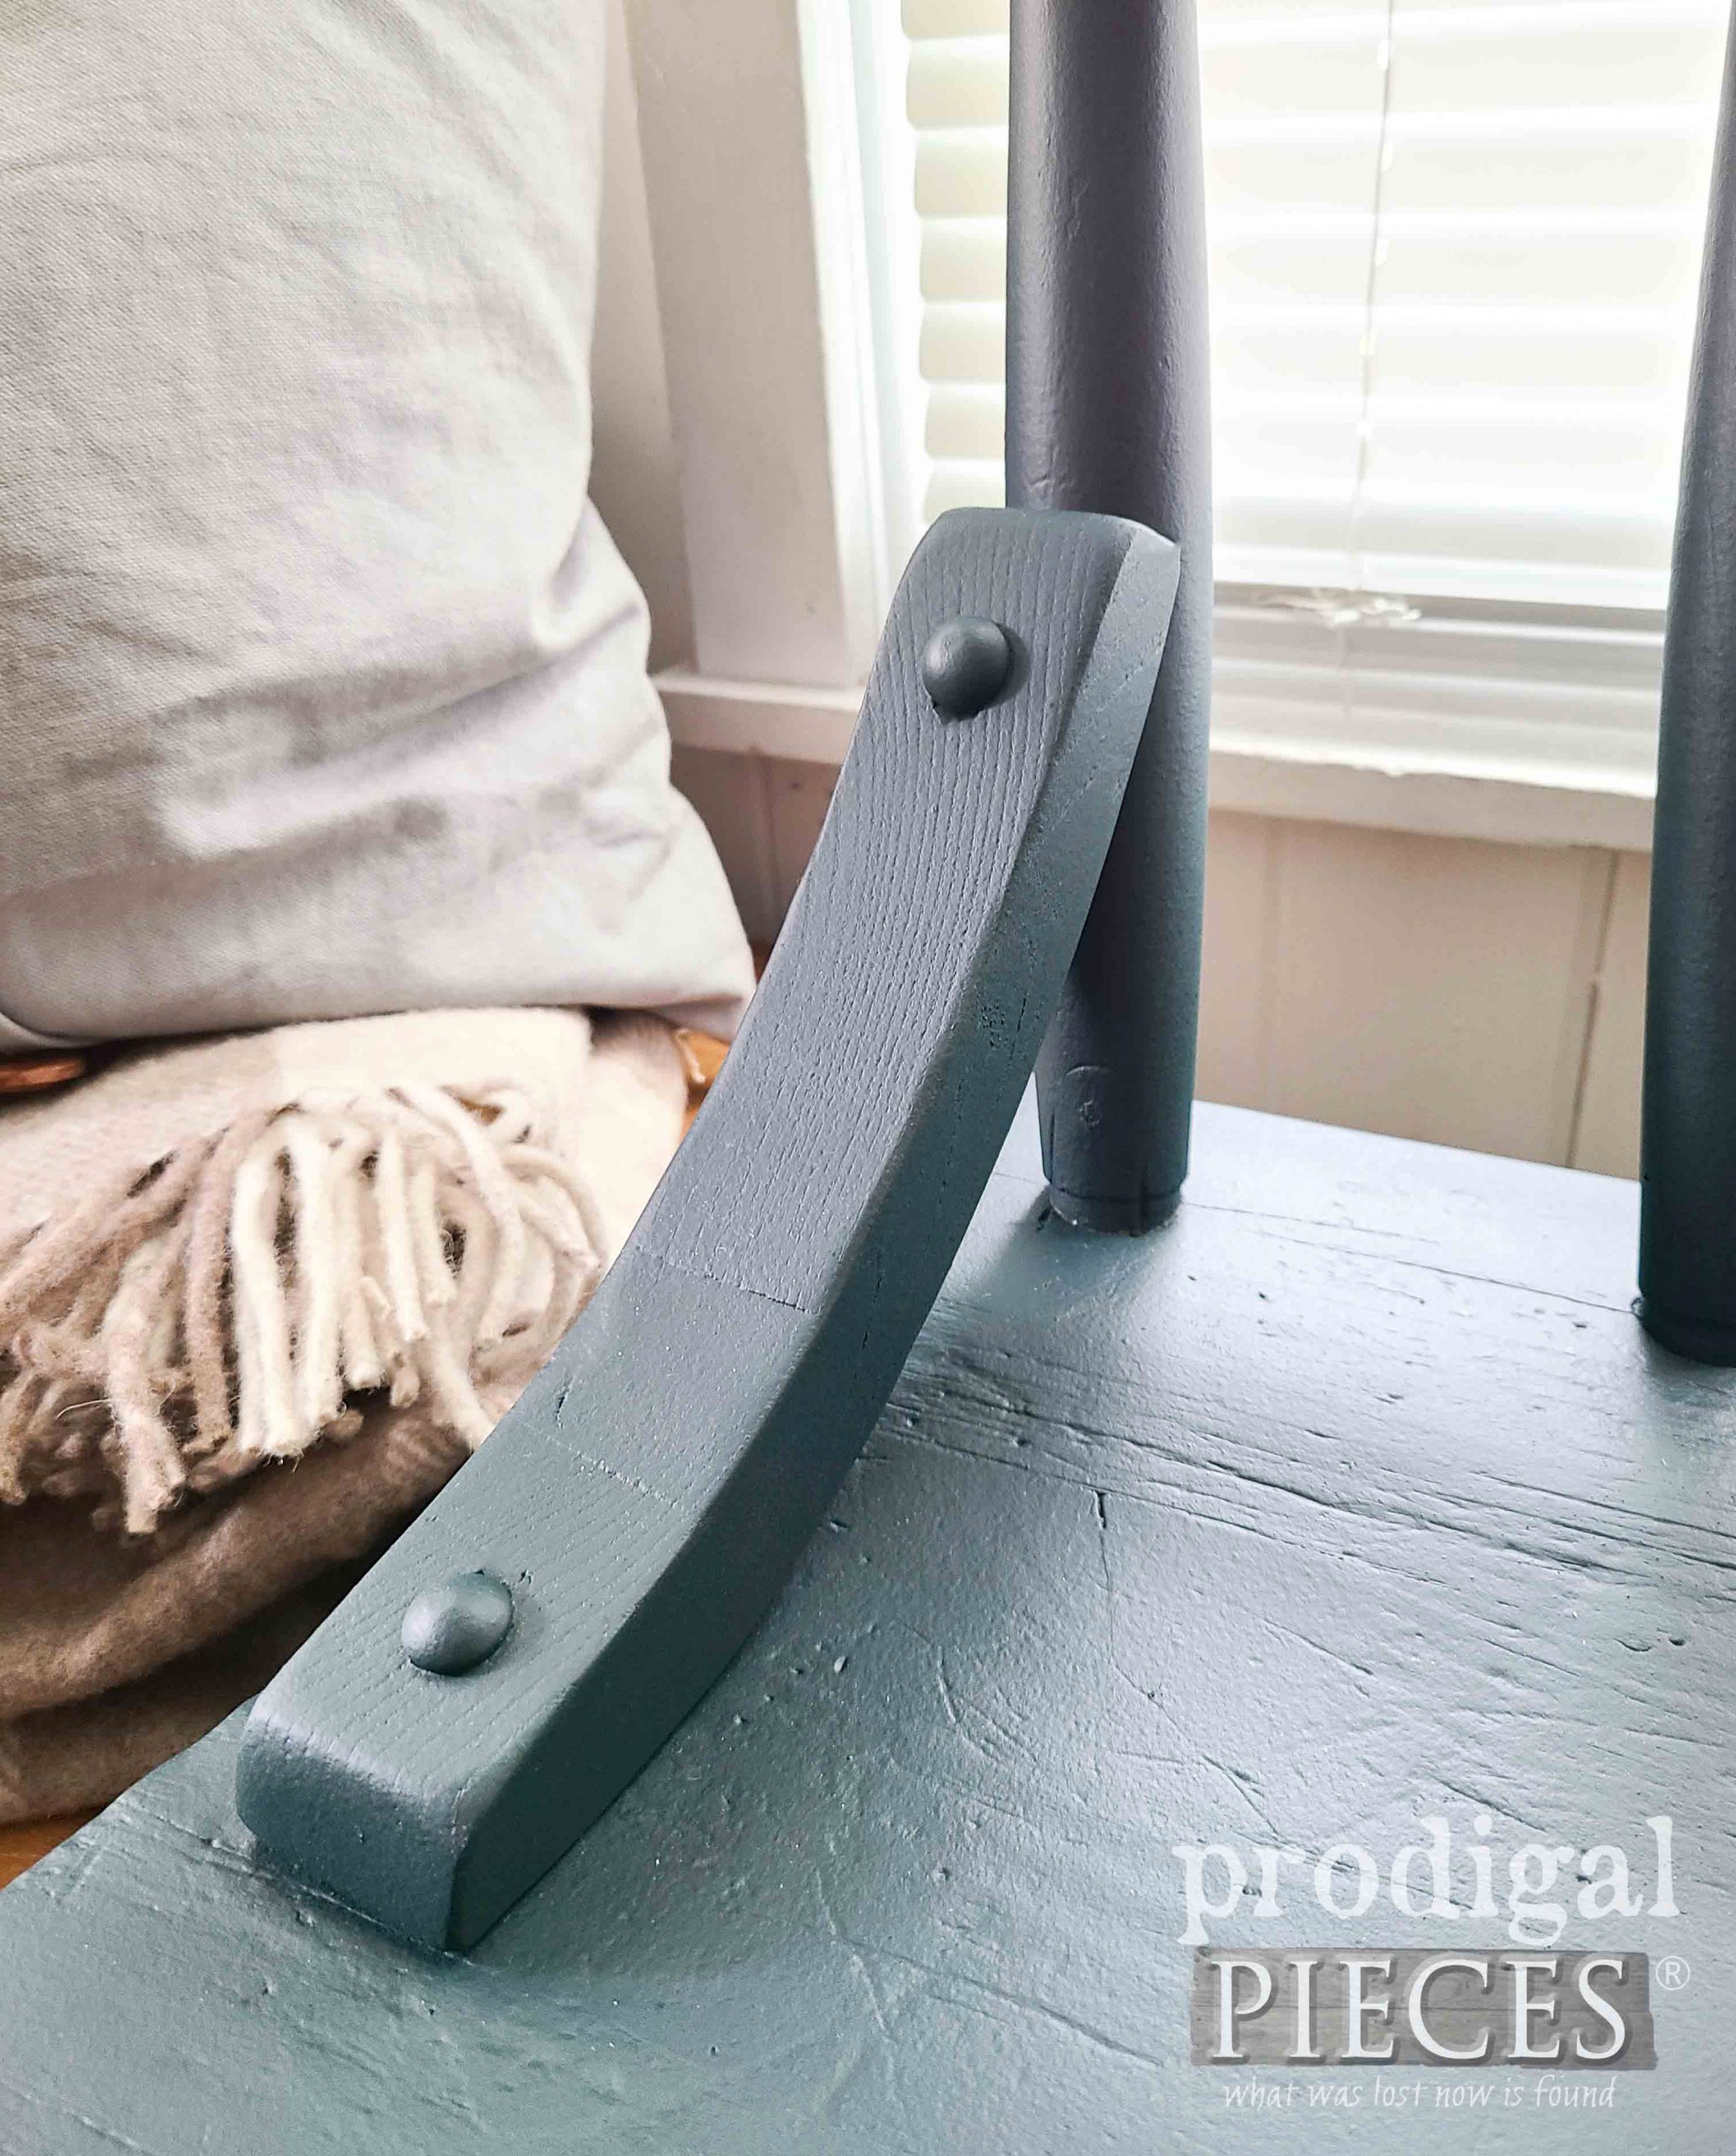 Repaired Green Bench Brace for Farmhouse Bench Makeover by Larissa of Prodigal Pieces | prodigalpieces.com #prodigalpieces #farmhouse #furniture #diy